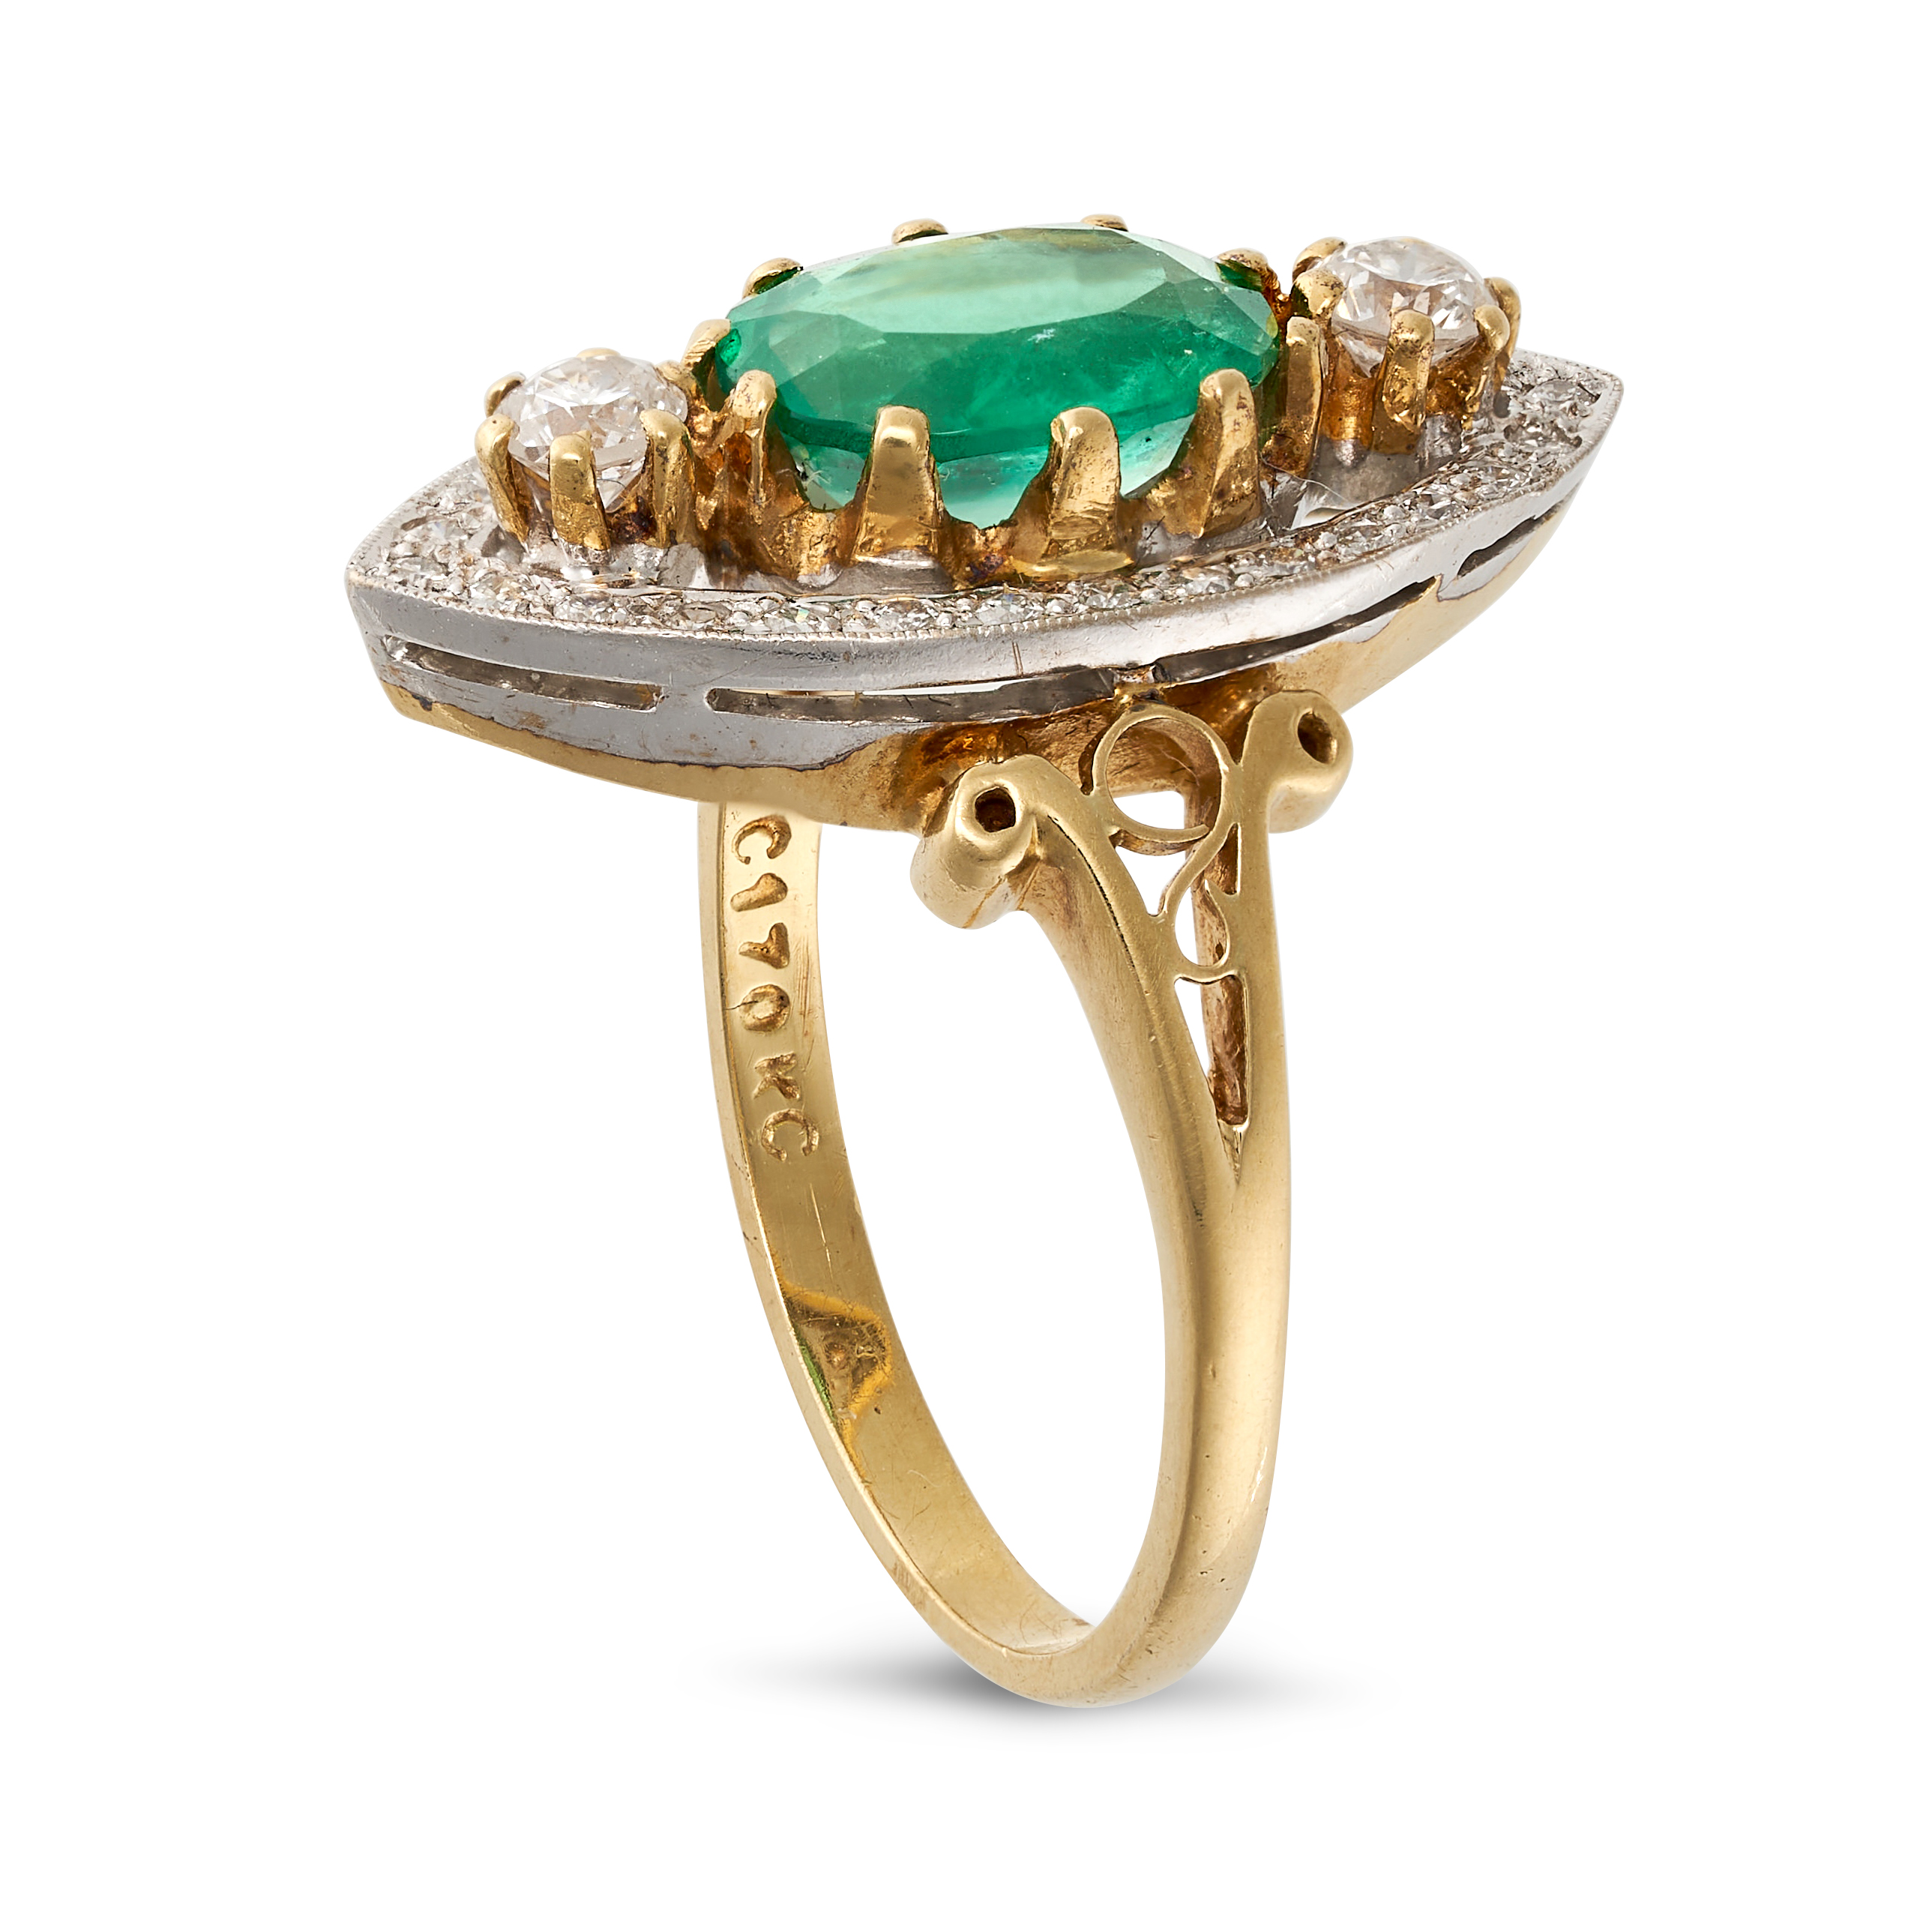 AN EMERALD AND DIAMOND DRESS RING in 18ct yellow and white gold, set with an oval cut emerald of ... - Image 2 of 2